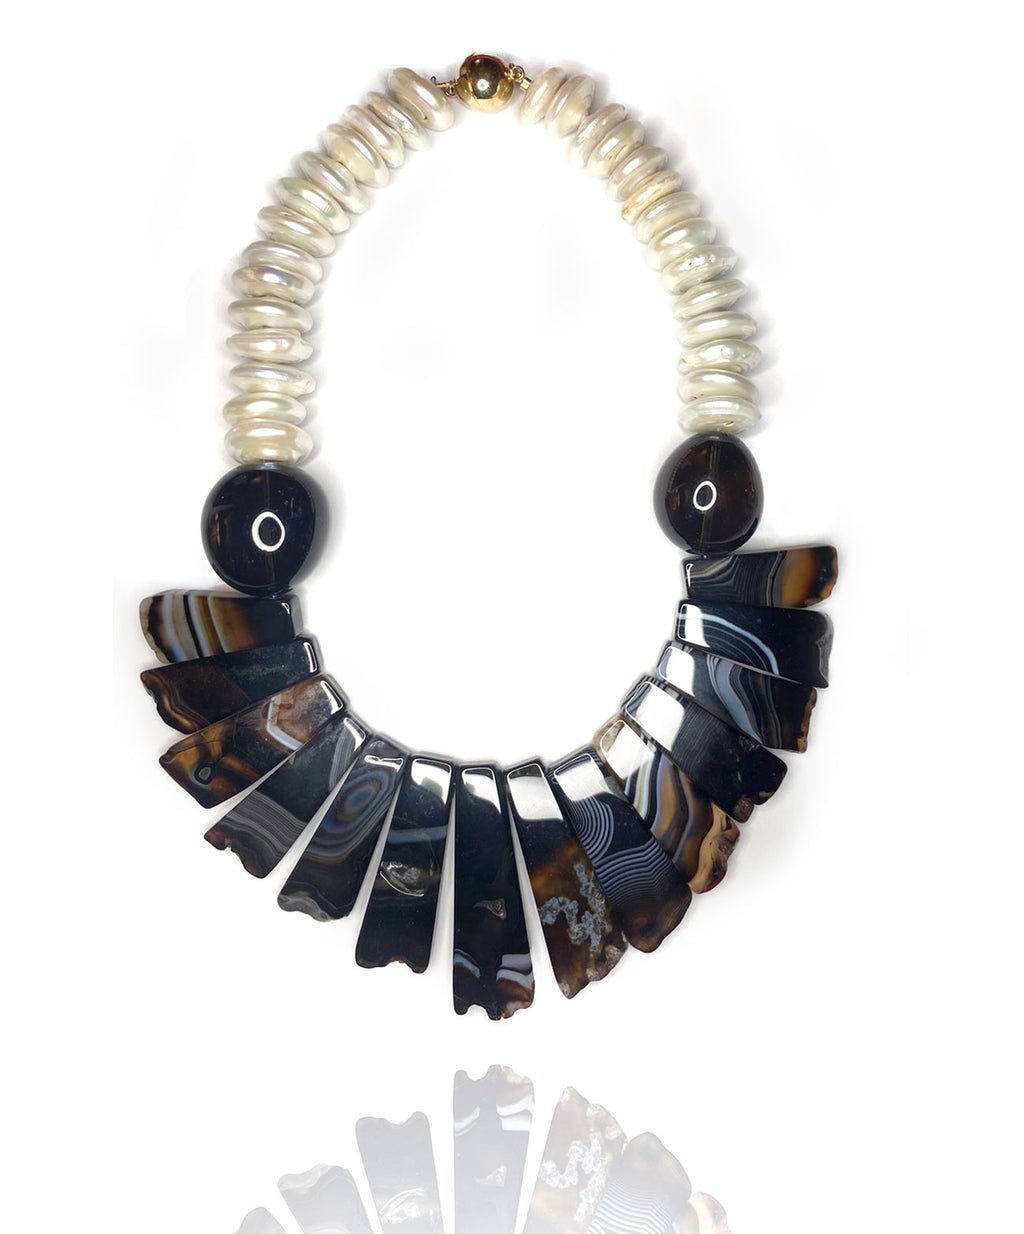 Exotic, tribal style necklace inspired by travel to the 'wilderness'. Mix of shell pearls, black and caramel agate chunks, smokey quartz and gold plated silver magnetic clasp. Dare to wear this adventurous yet stylish statement piece.